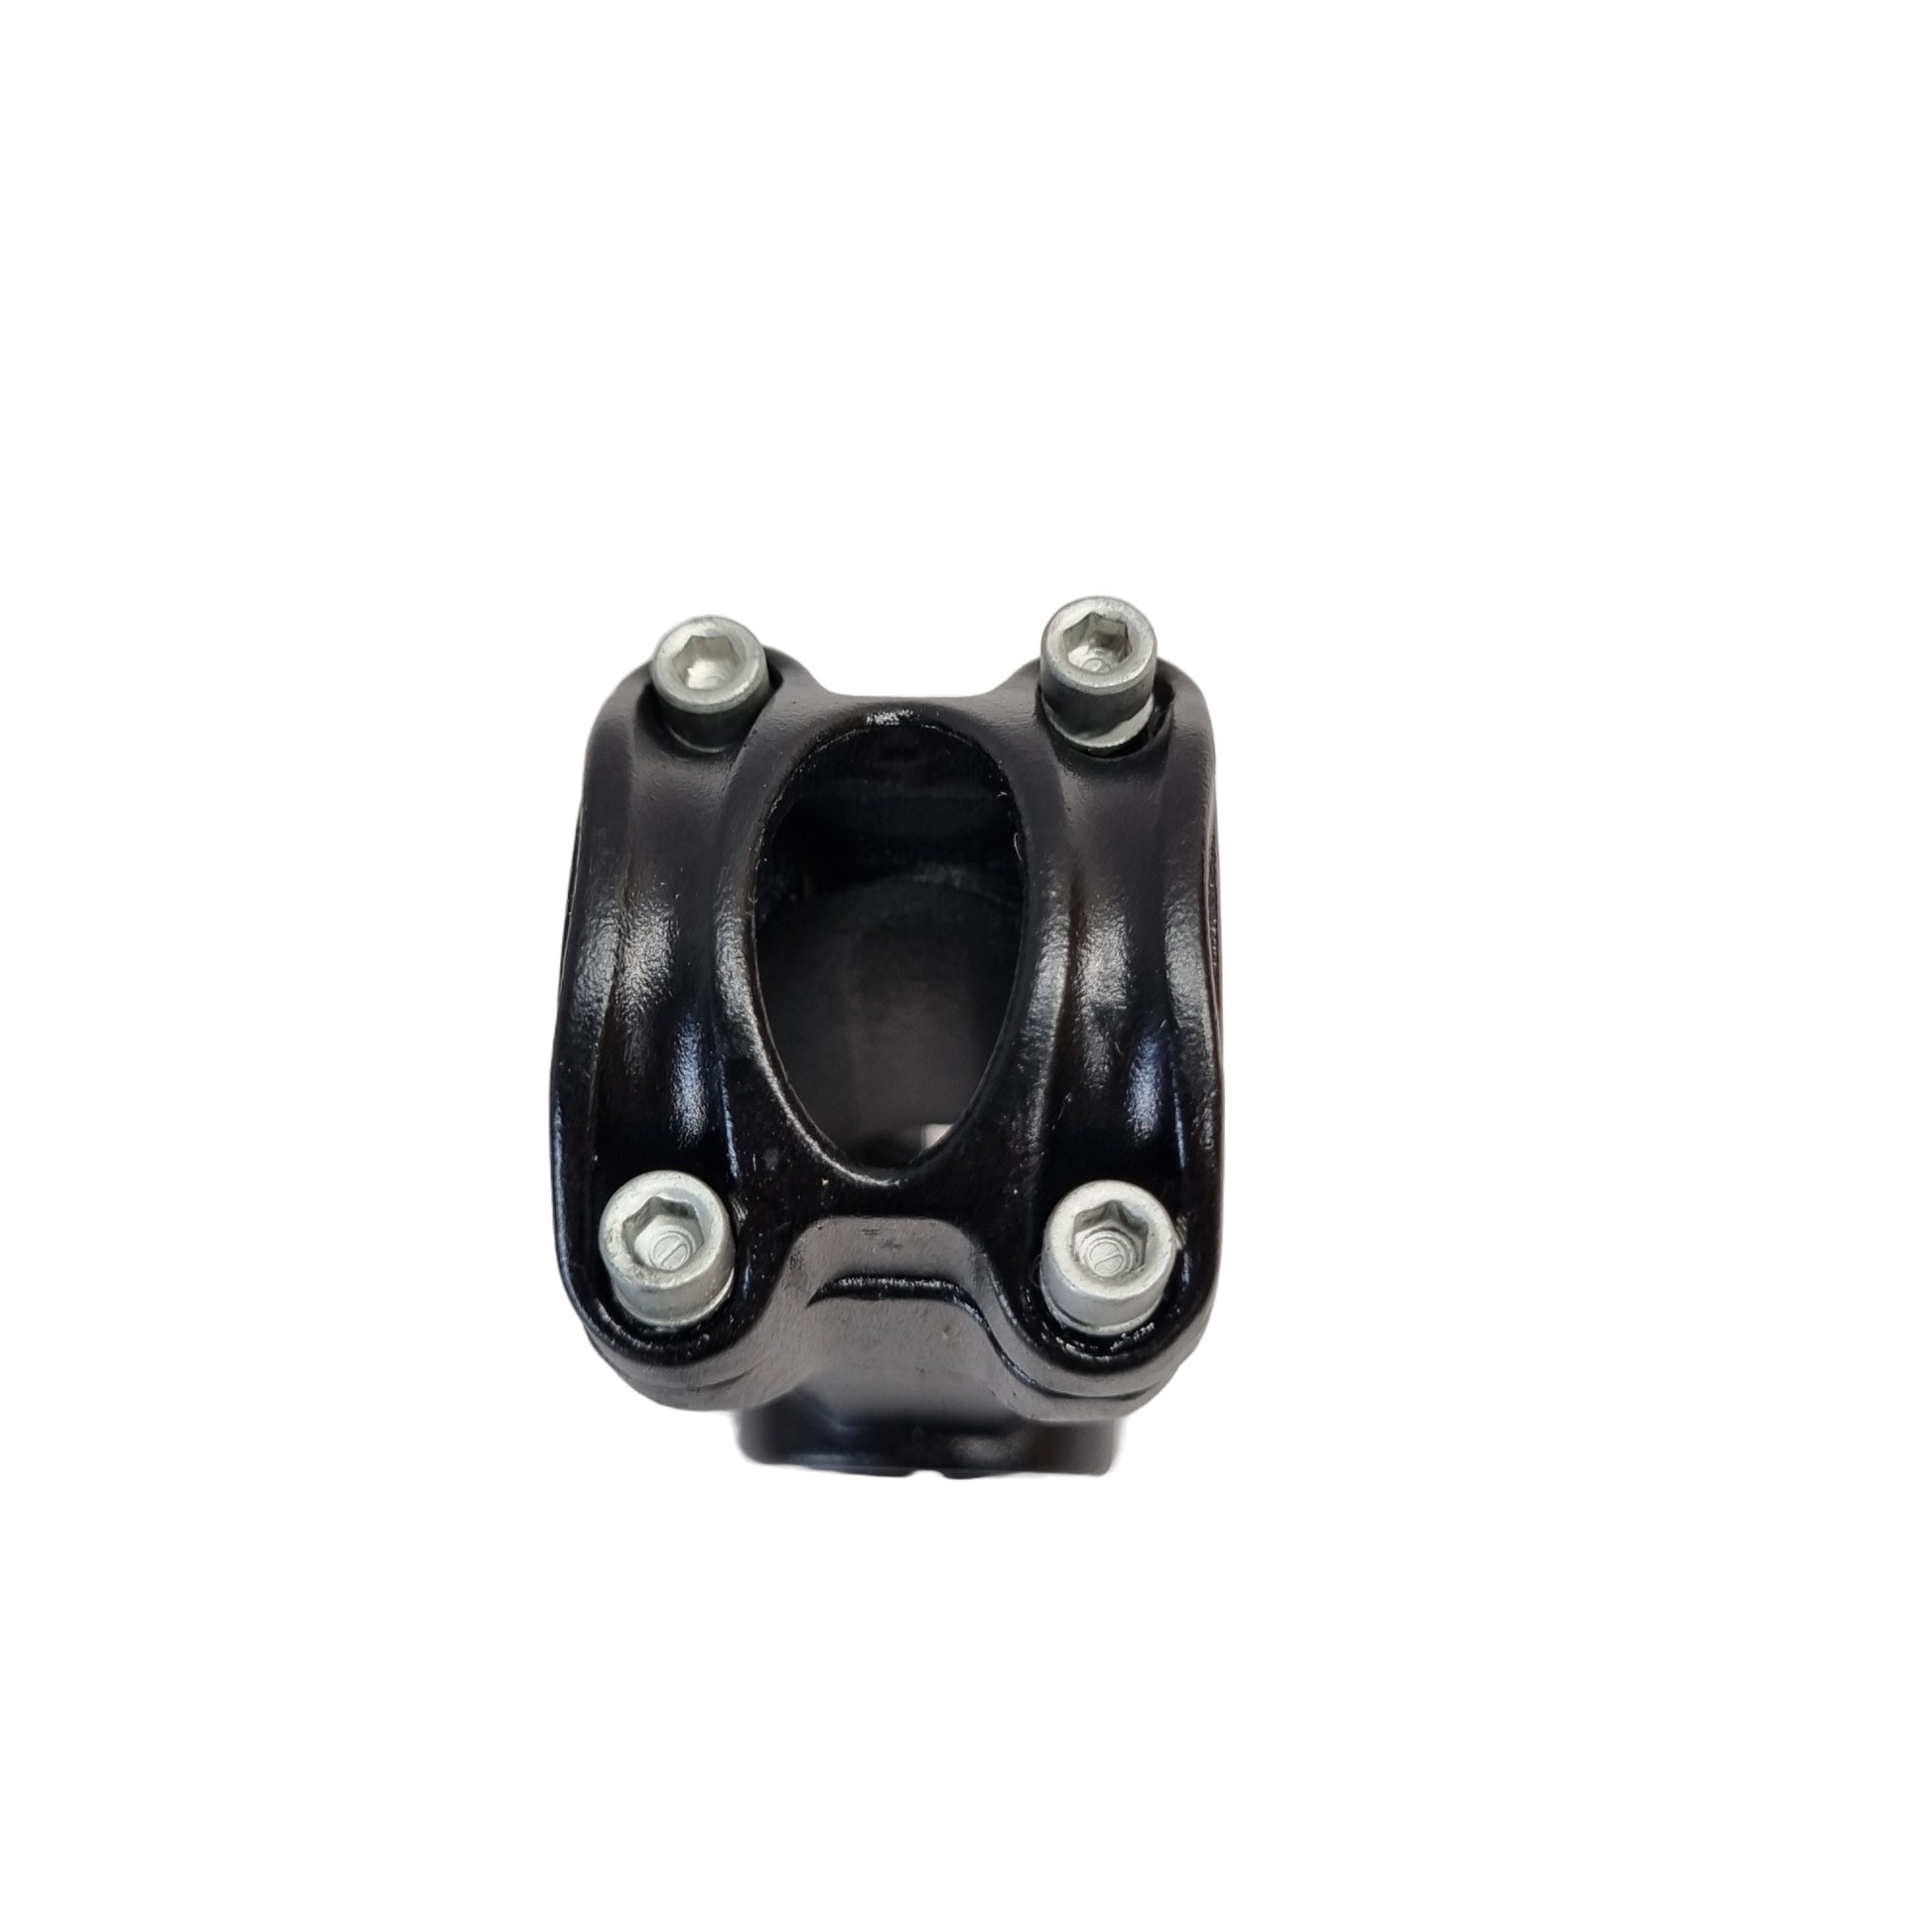 Bicycle alloy stem for threadless fork spare part front top view by omobikes